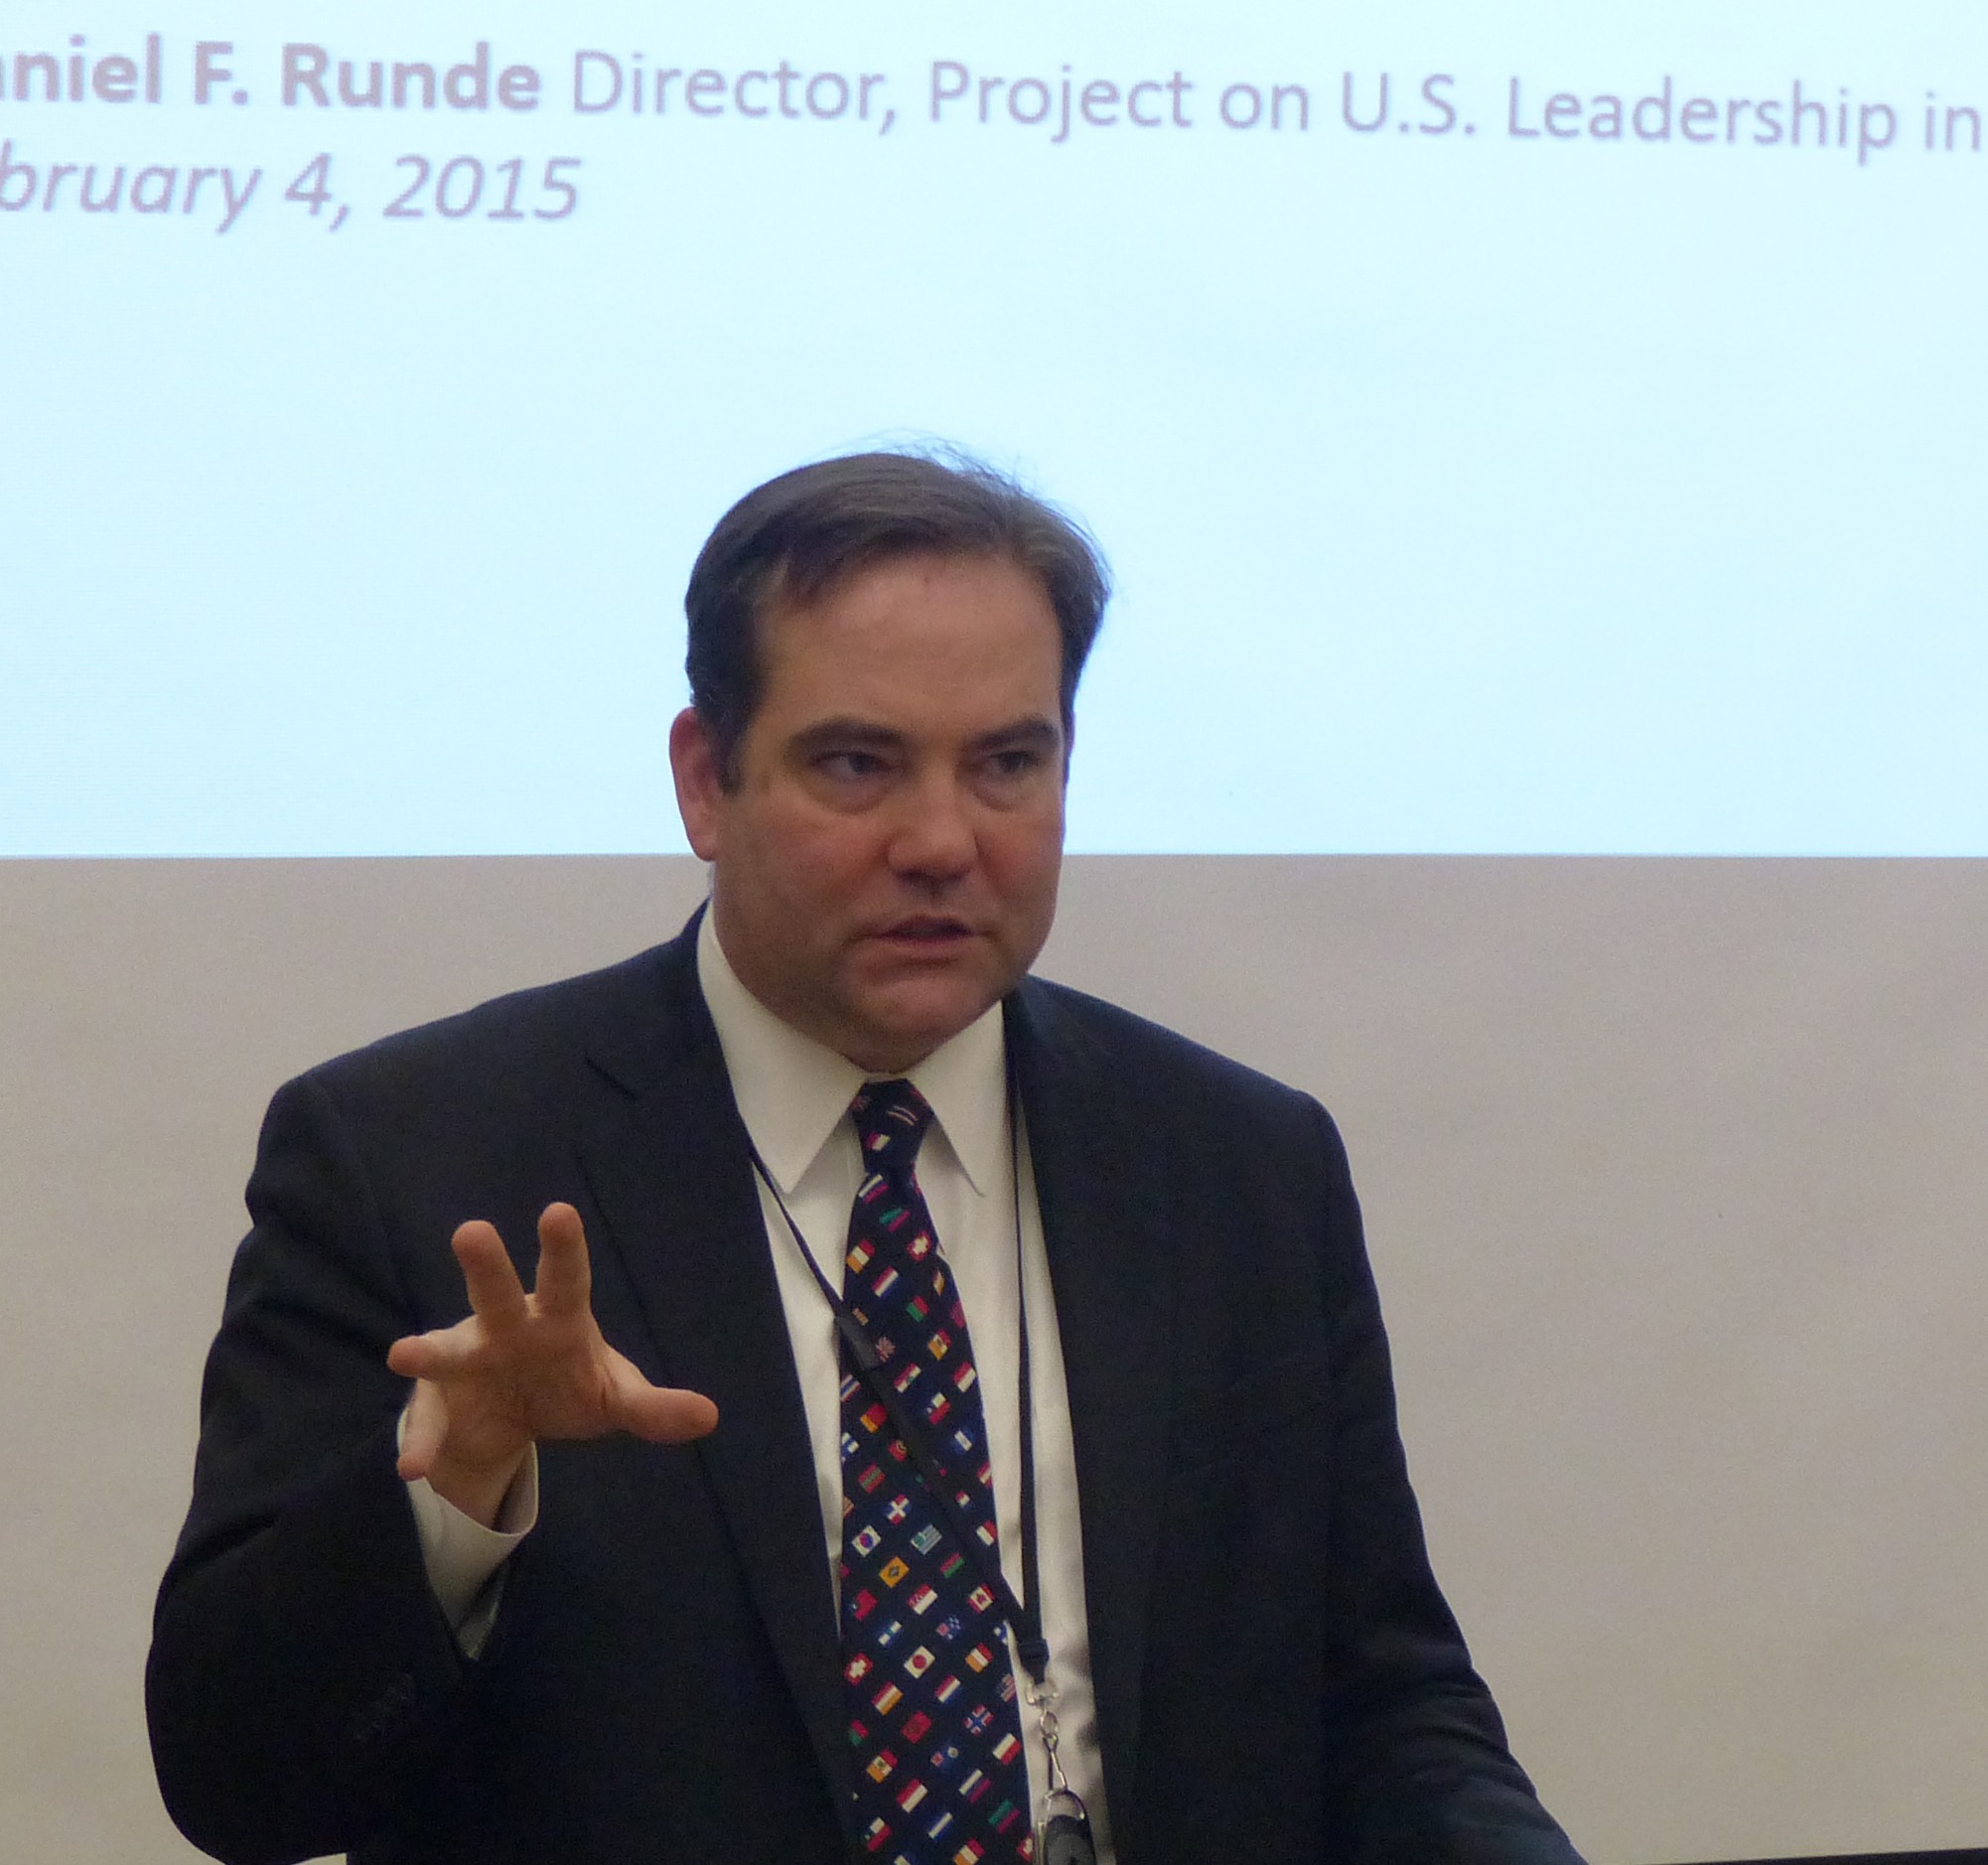 Daniel Runde, Director of the Project on Prosperity and Development at the Center for Strategic and International Studies (CSIS)